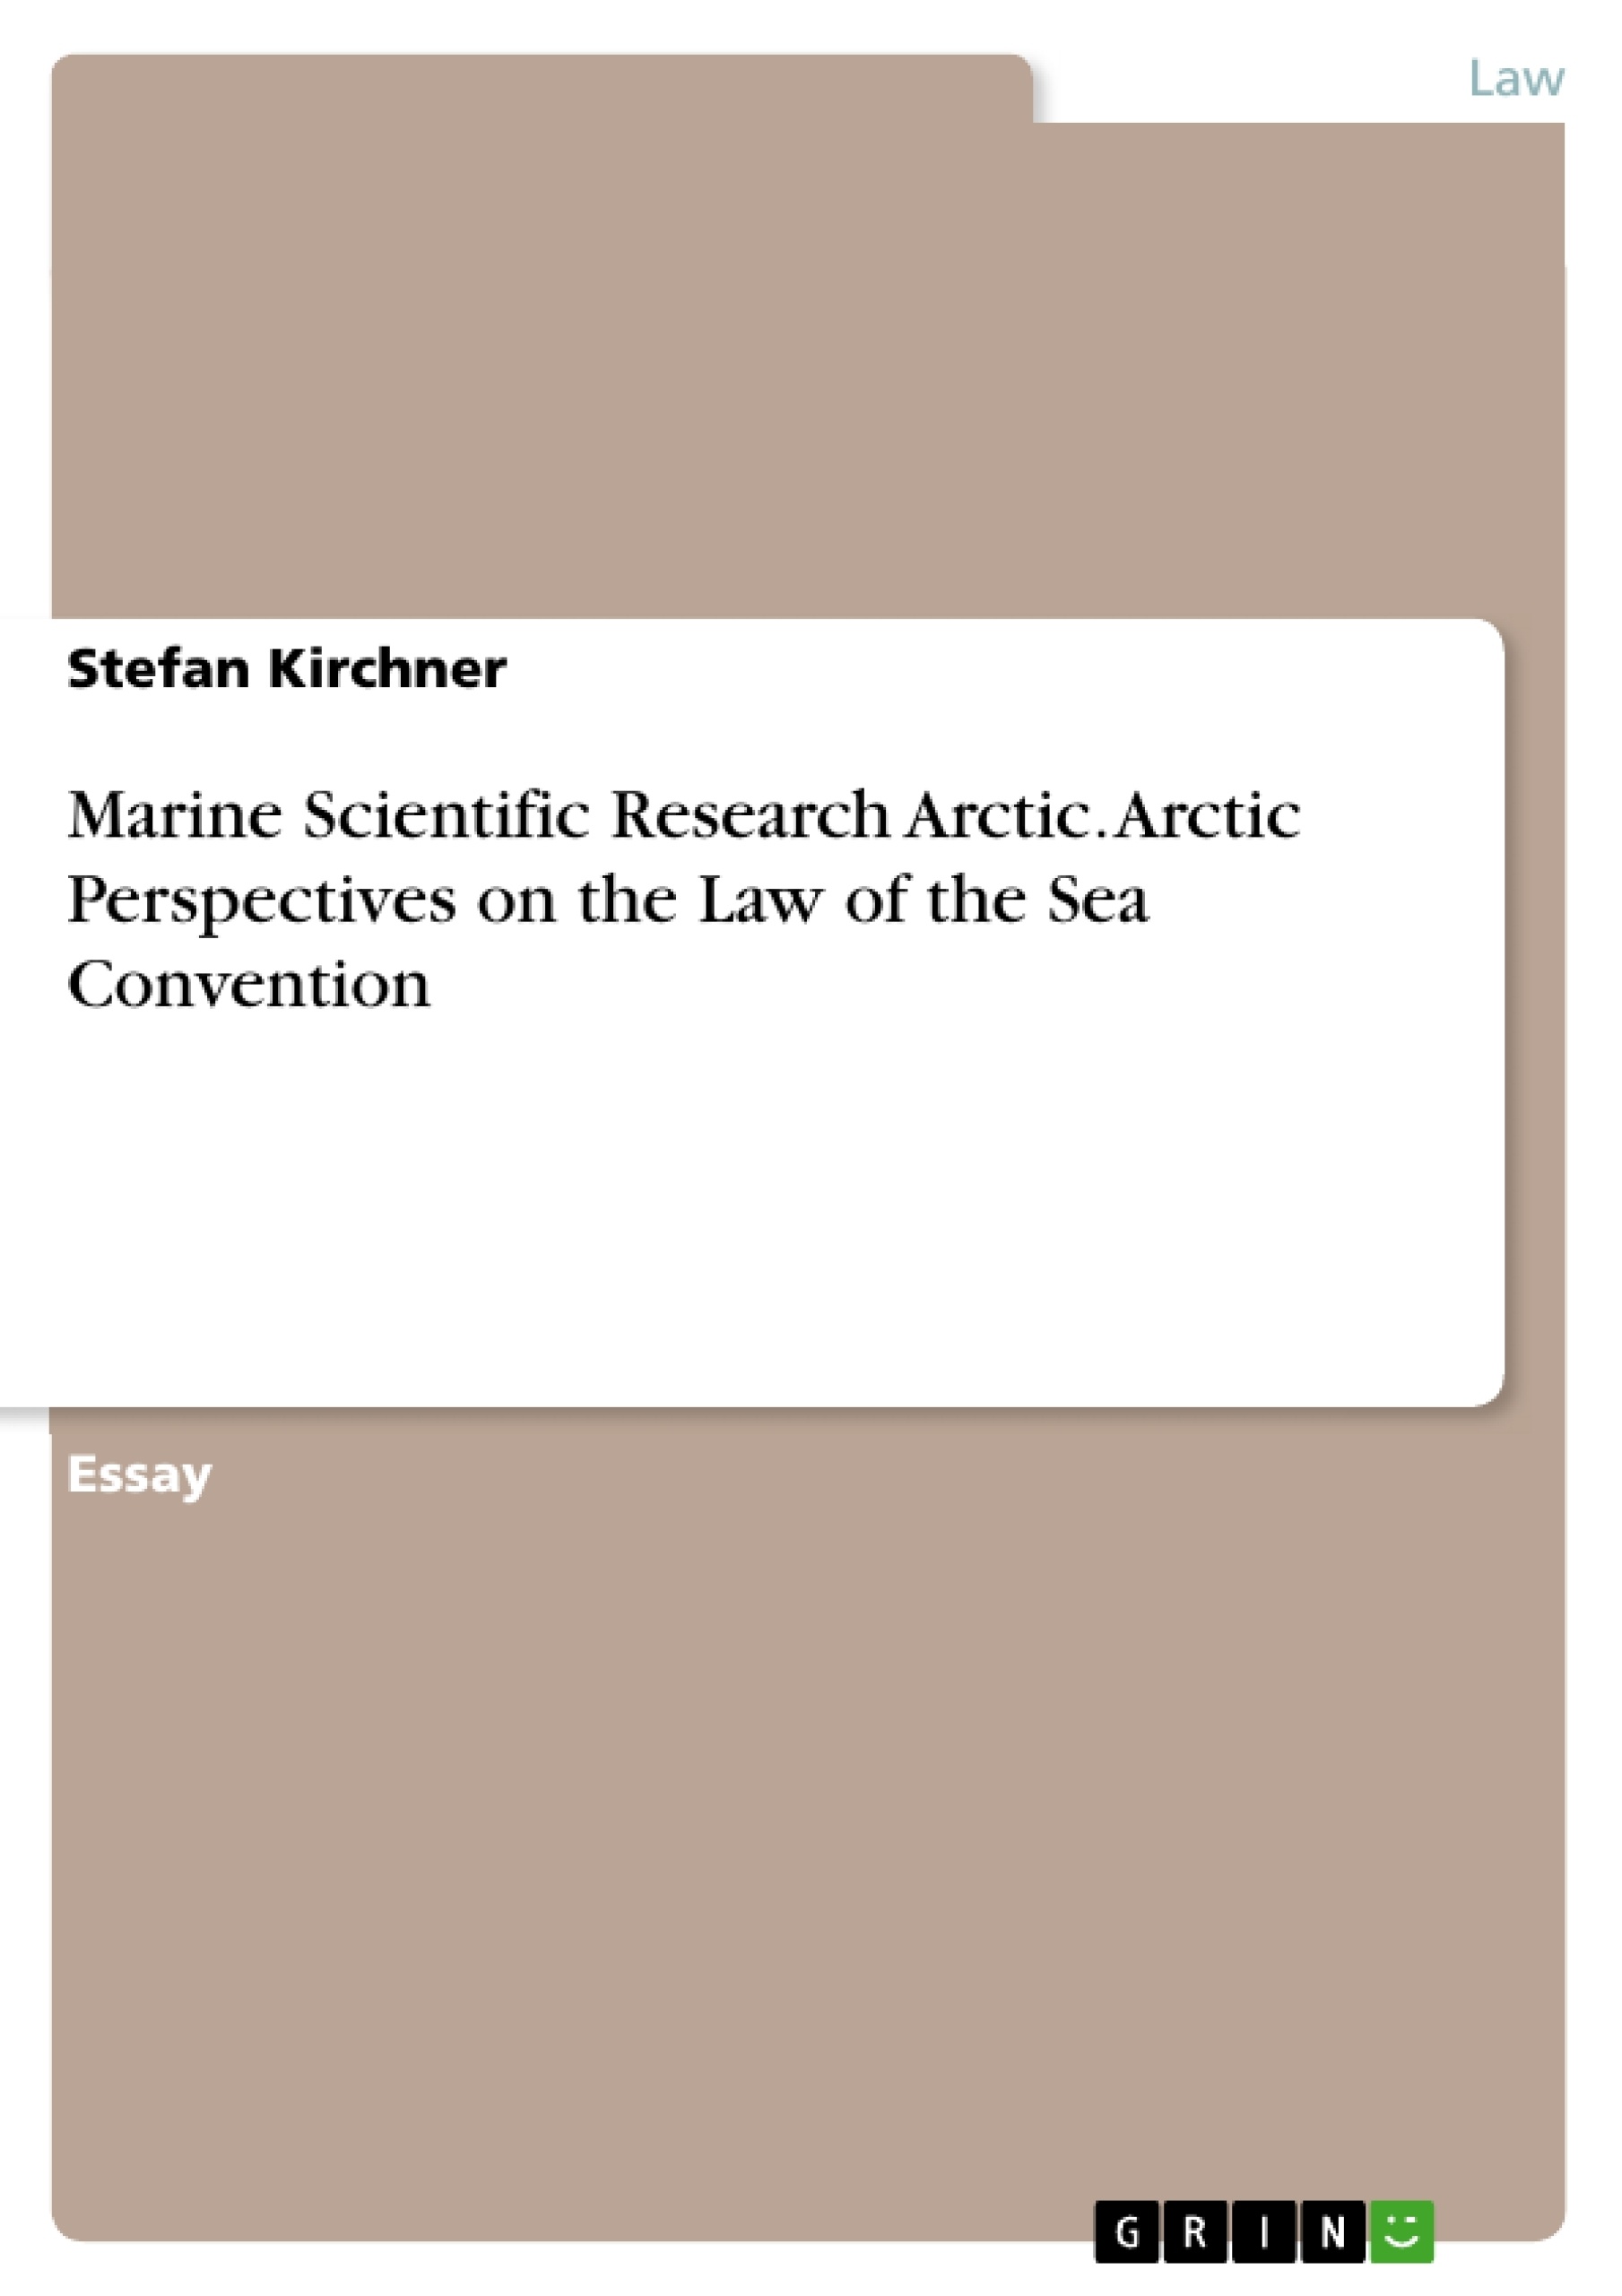 Title: Marine Scientific Research Arctic. Arctic Perspectives on the Law of the Sea Convention